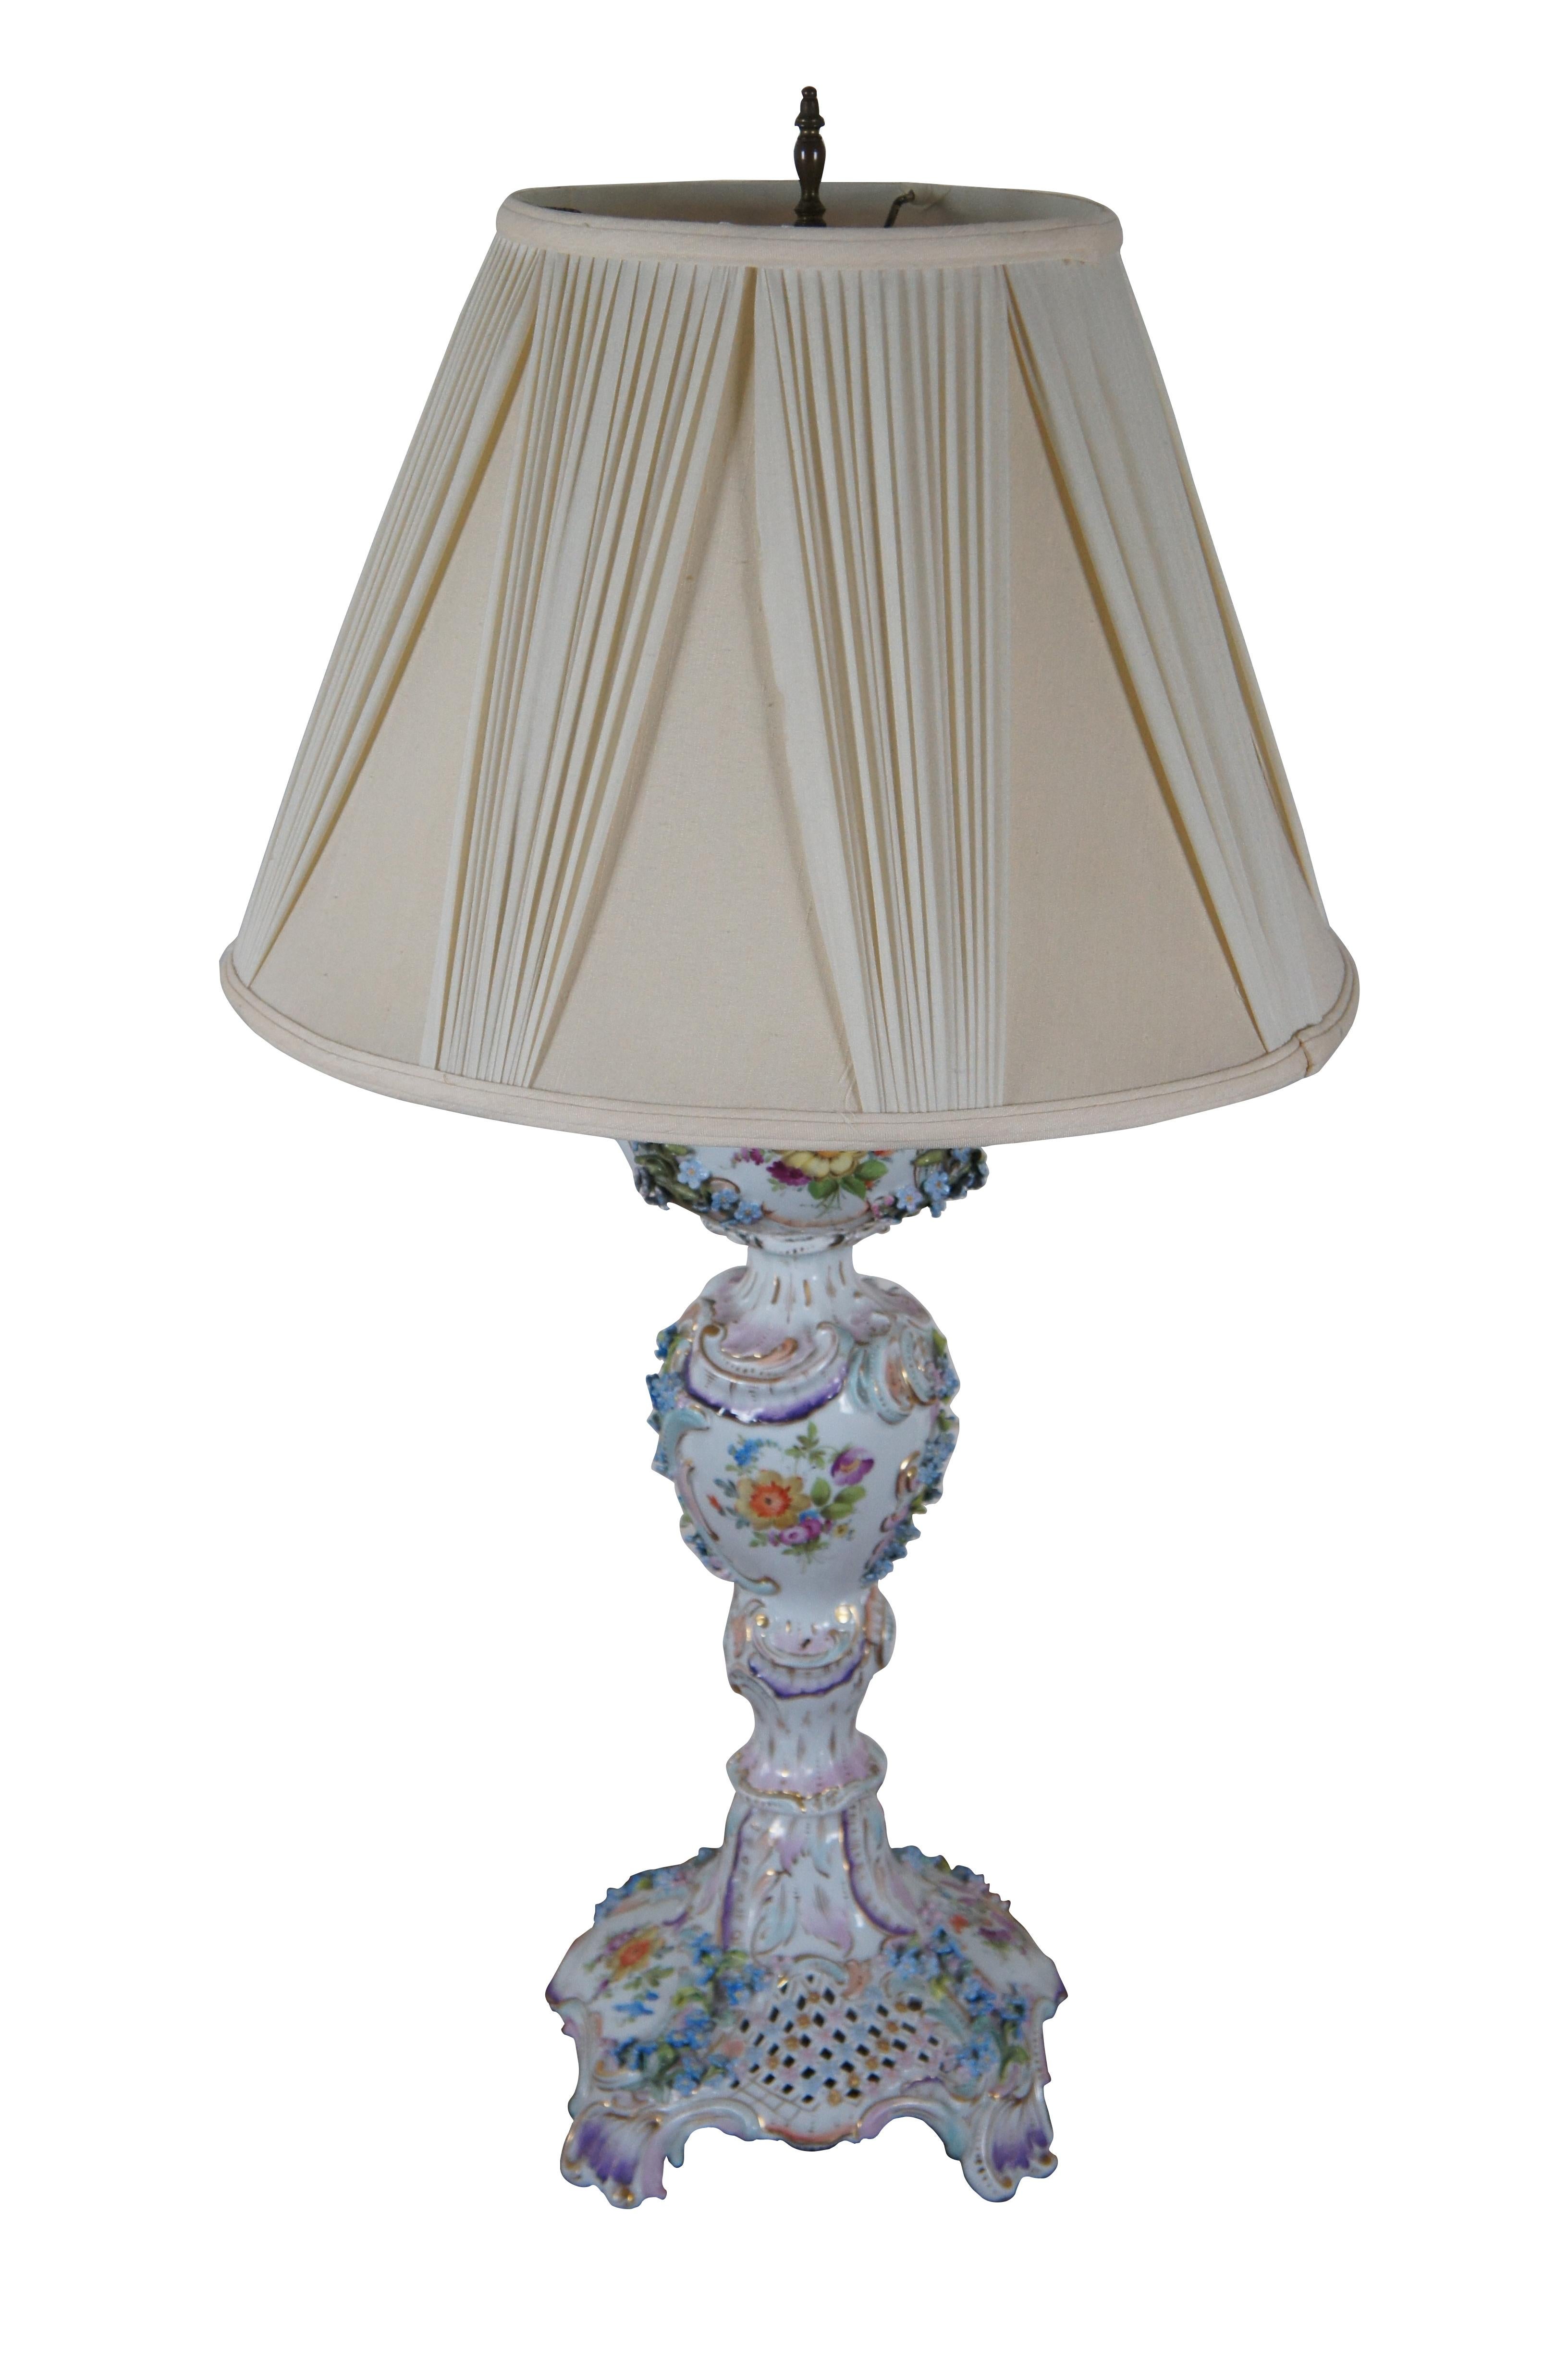 Late 19th – early 20th century Carl Thieme Meissen / Dresden porcelain two light table lamp featuring a reticulated base and oil lamp / double globe shaped body accented with three dimensional sprays of forget-me-nots and brightly painted with a